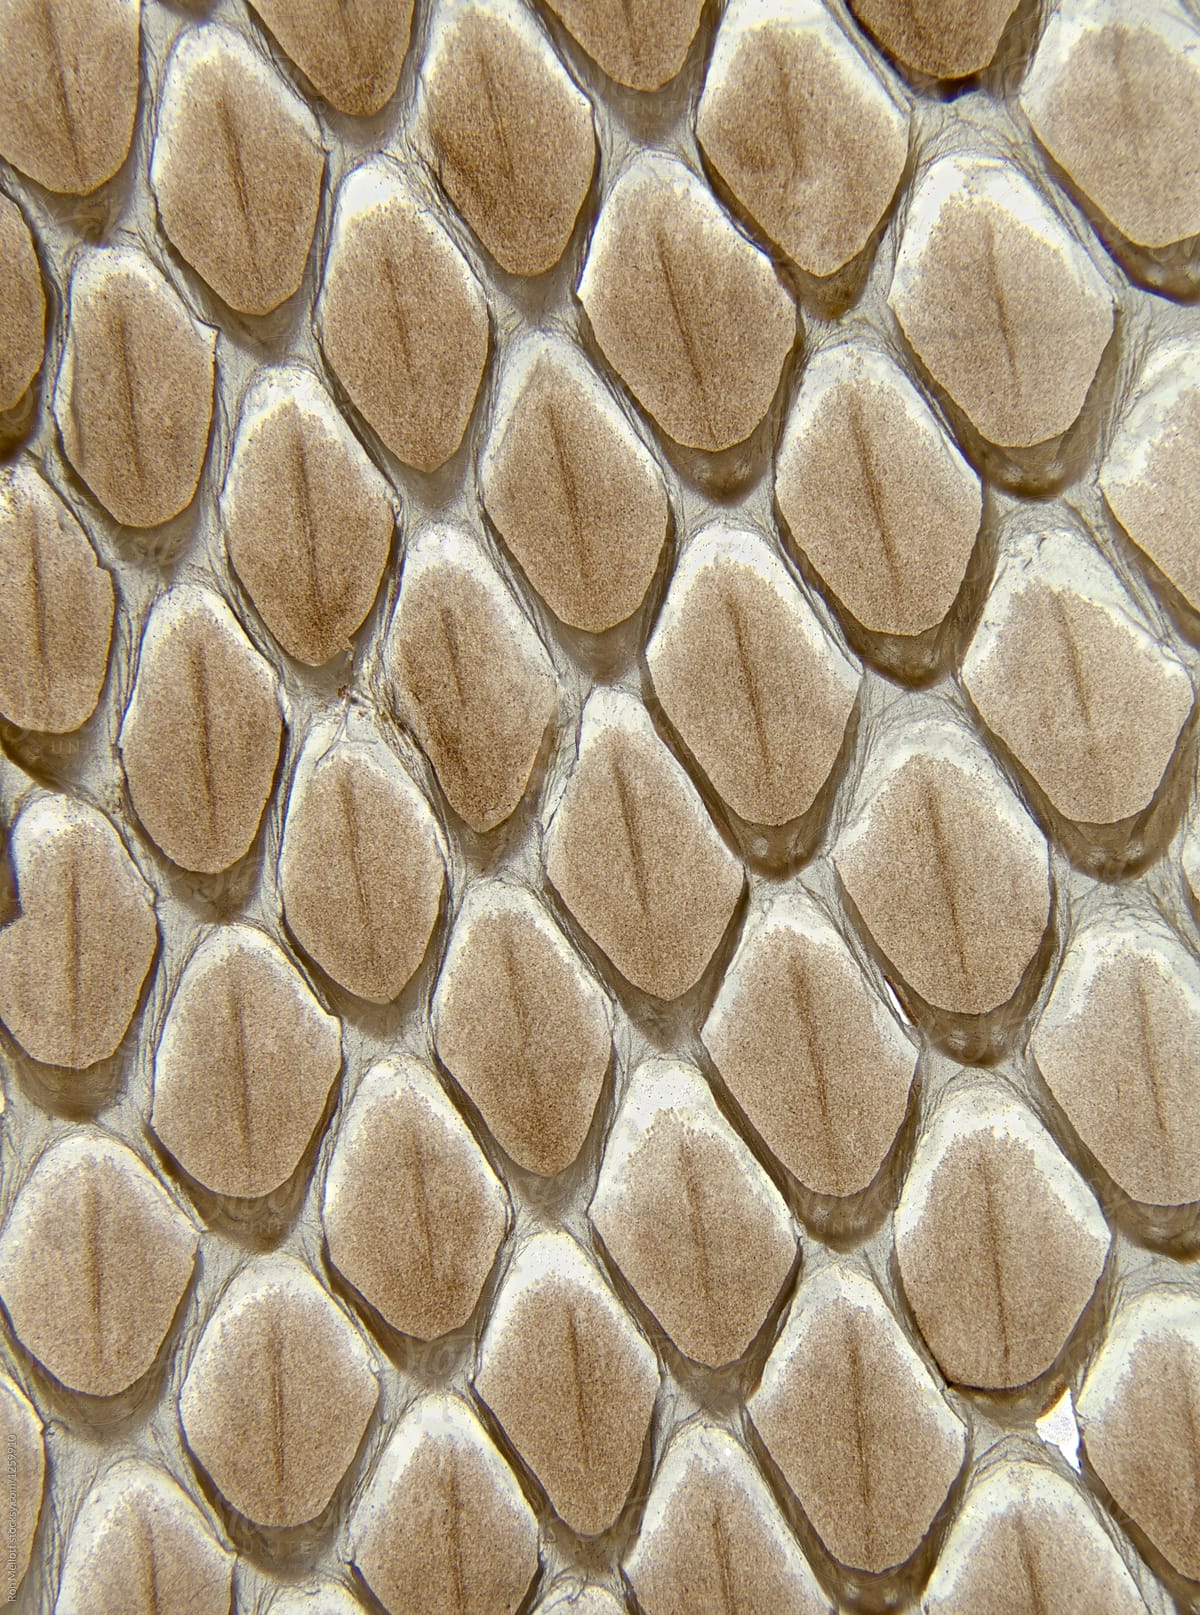 Closeup Macrophotograph Of The Shed Skin Of A Snake Showing Patterns And  Textures Of Scales by Stocksy Contributor Ron Mellott - Stocksy